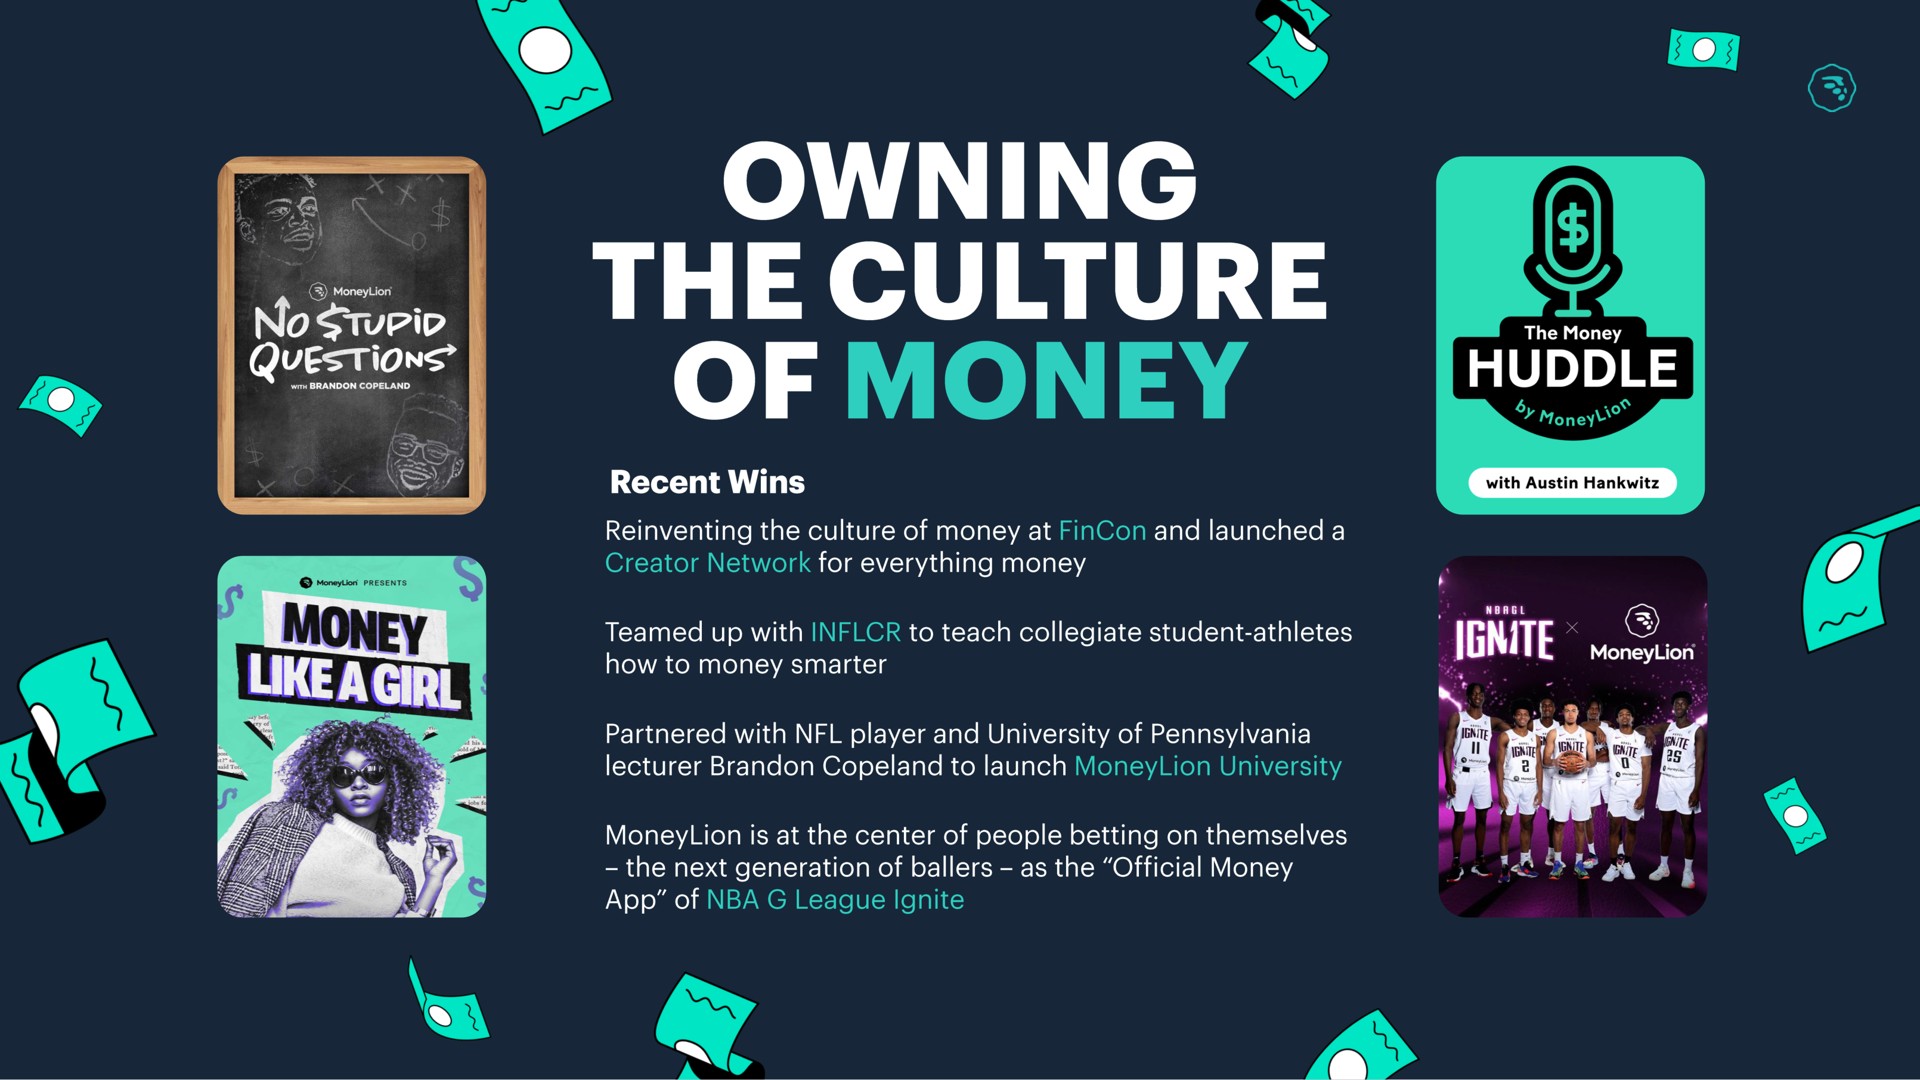 mis owning the culture of money | MoneyLion